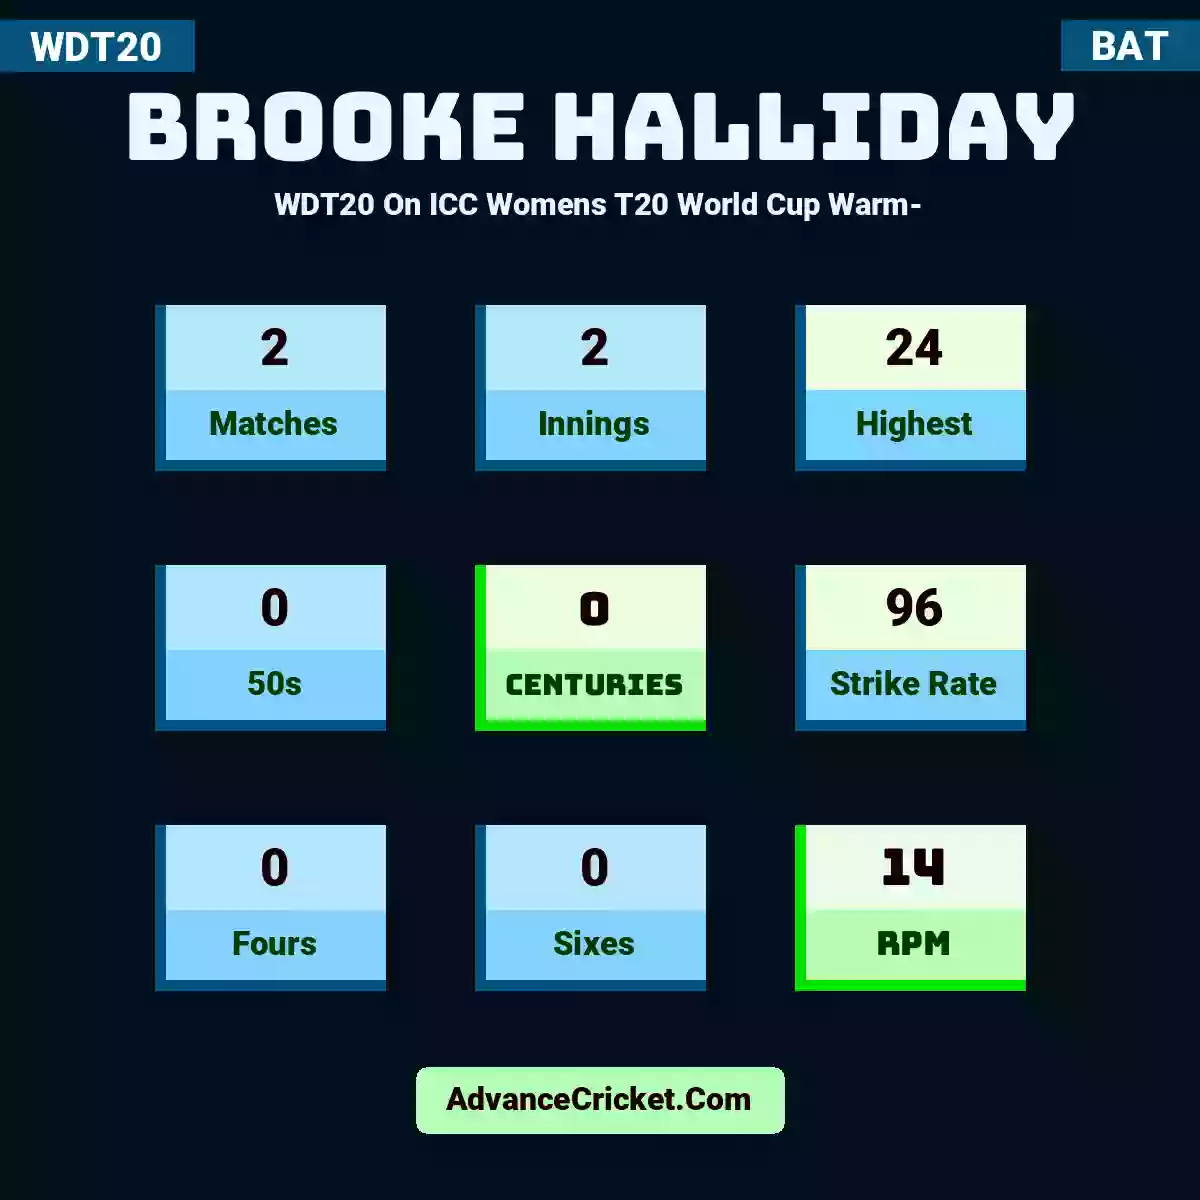 Brooke Halliday WDT20  On ICC Womens T20 World Cup Warm-, Brooke Halliday played 2 matches, scored 24 runs as highest, 0 half-centuries, and 0 centuries, with a strike rate of 96. B.Halliday hit 0 fours and 0 sixes, with an RPM of 14.